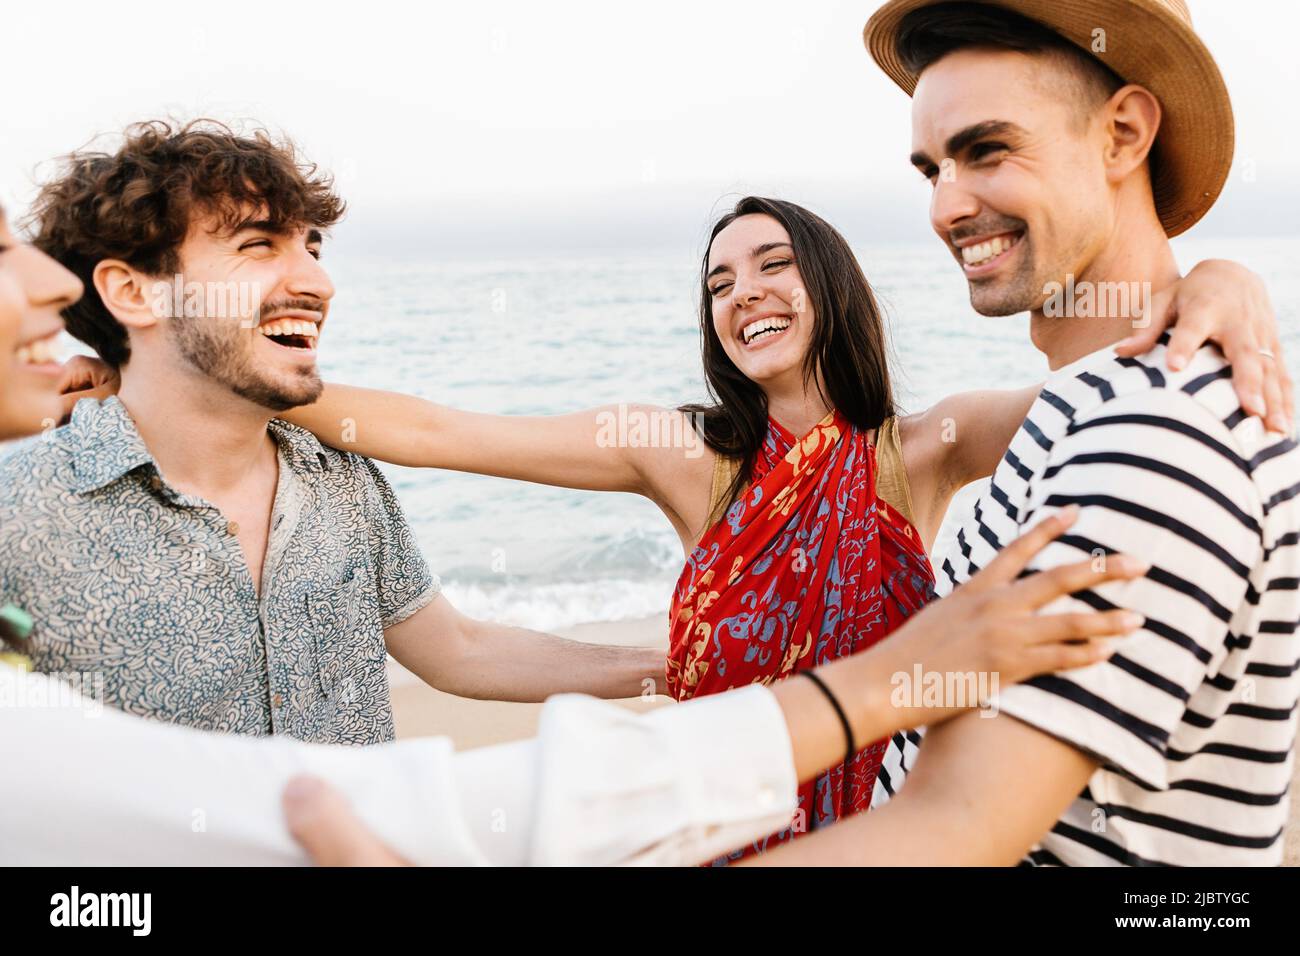 Group of happy young friends laughing together while having fun on the beach Stock Photo